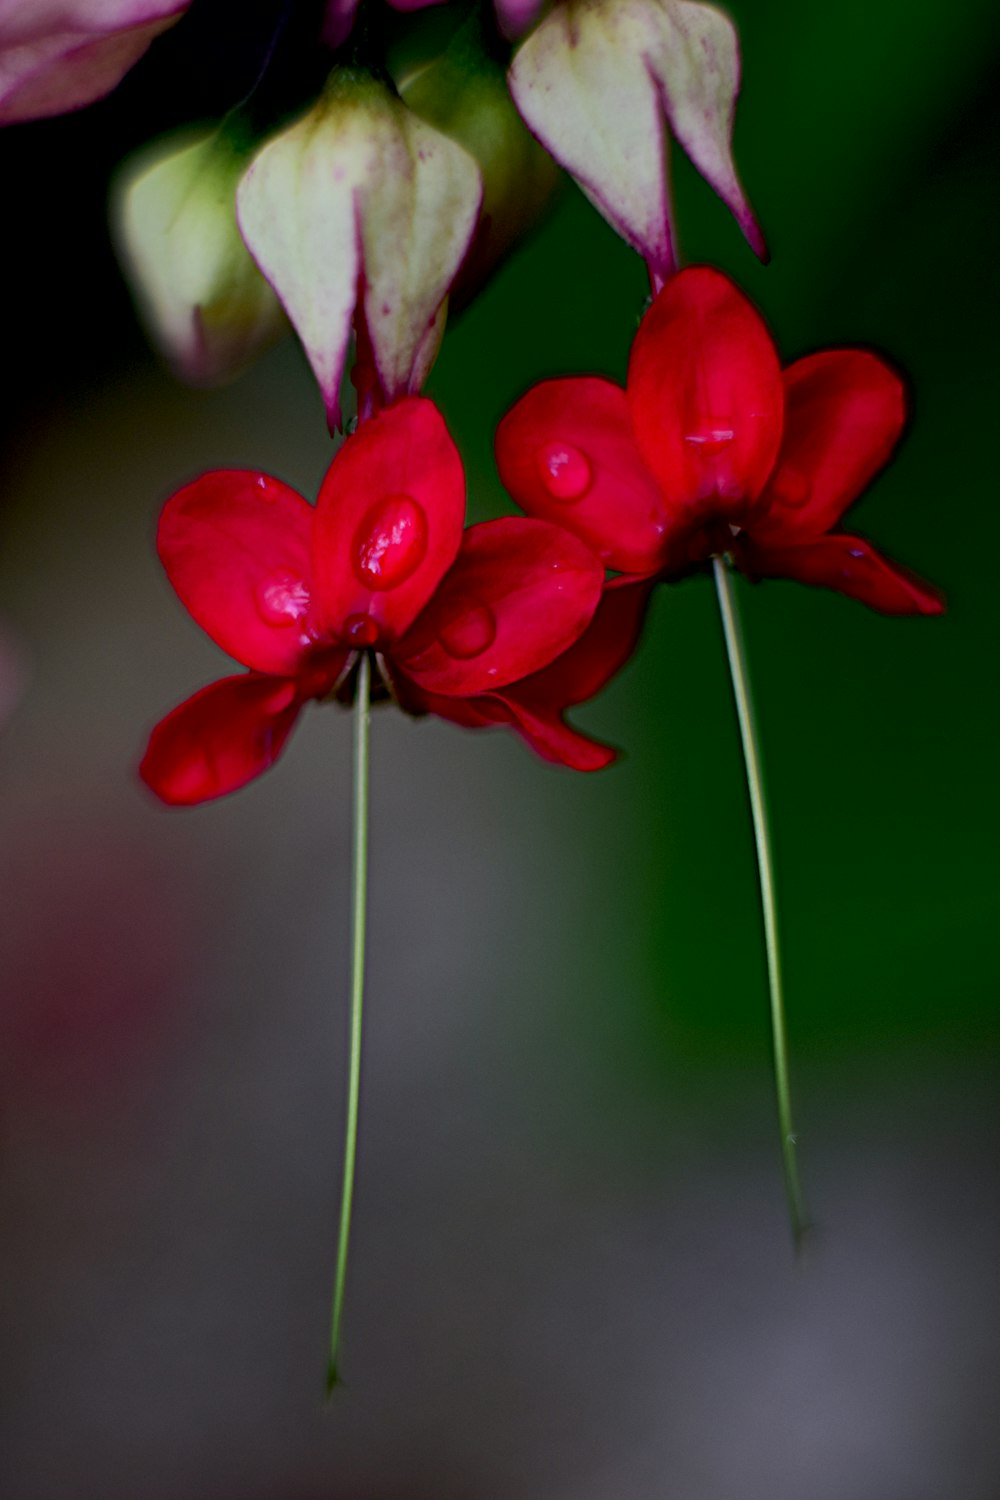 a close up of a red flower with water droplets on it